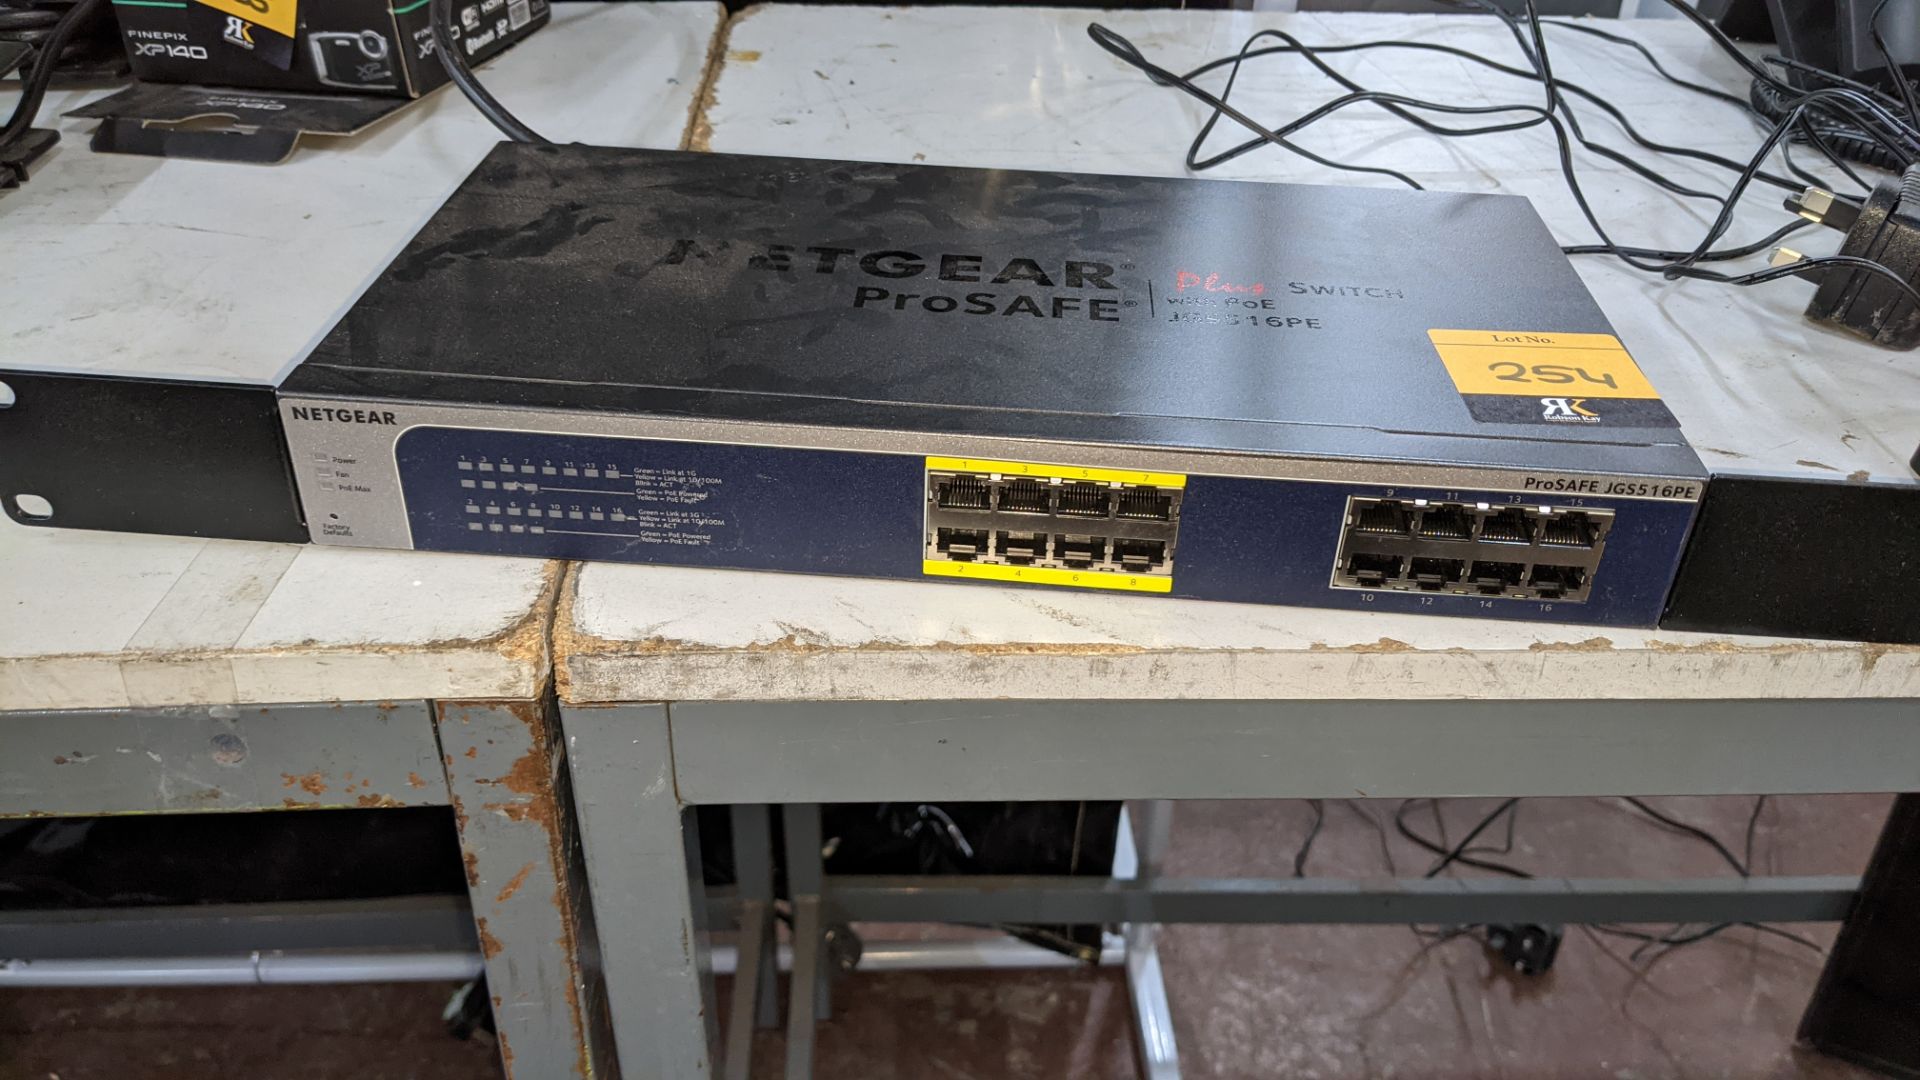 Netgear Prosafe Plus switch with PoE model JGS516PE. Includes optional rack mounting ears - Image 2 of 4